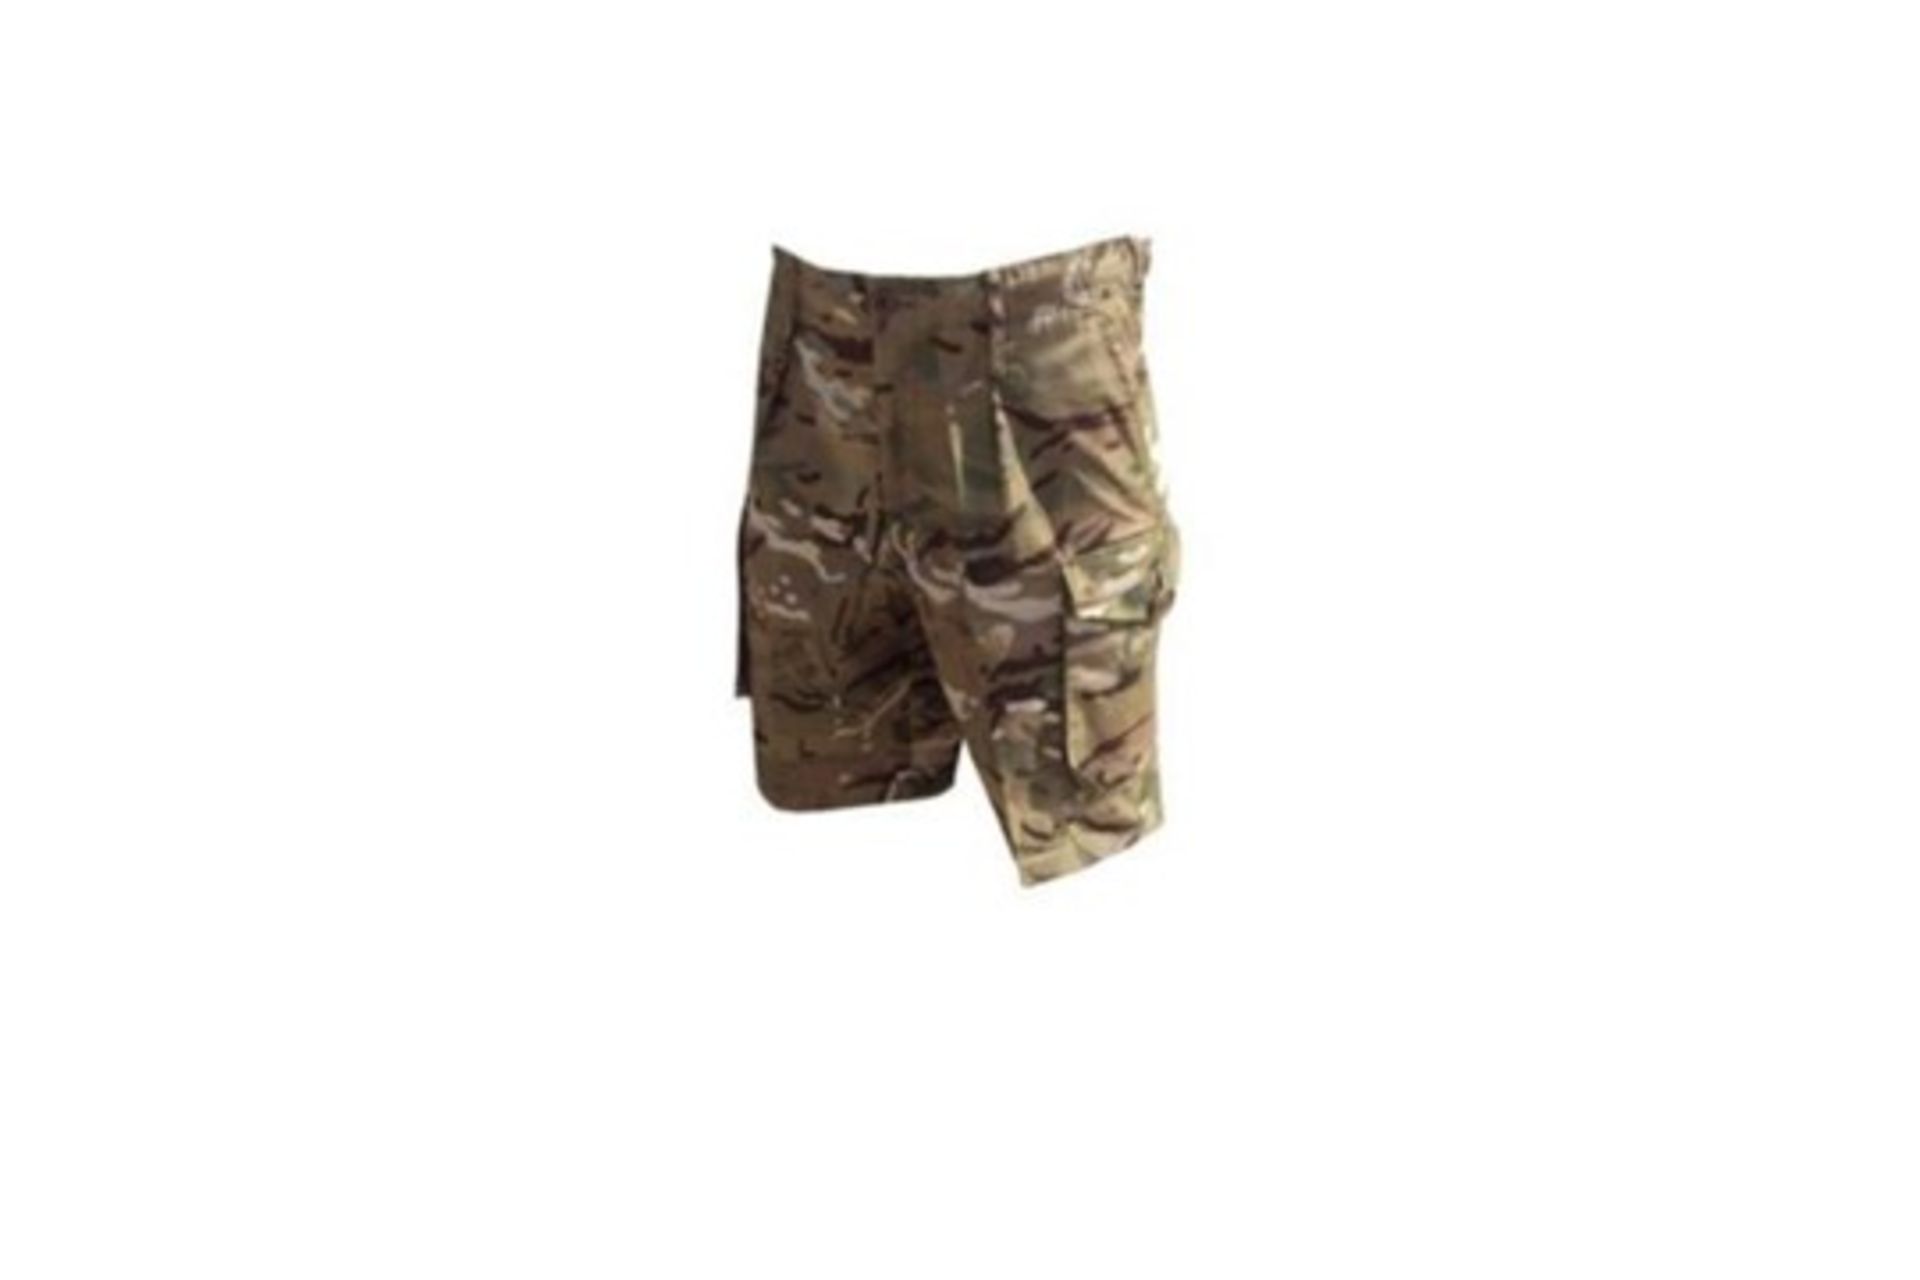 PACK OF 10 - MTP SHORTS - MIX OF SIZES - BRAND NEW